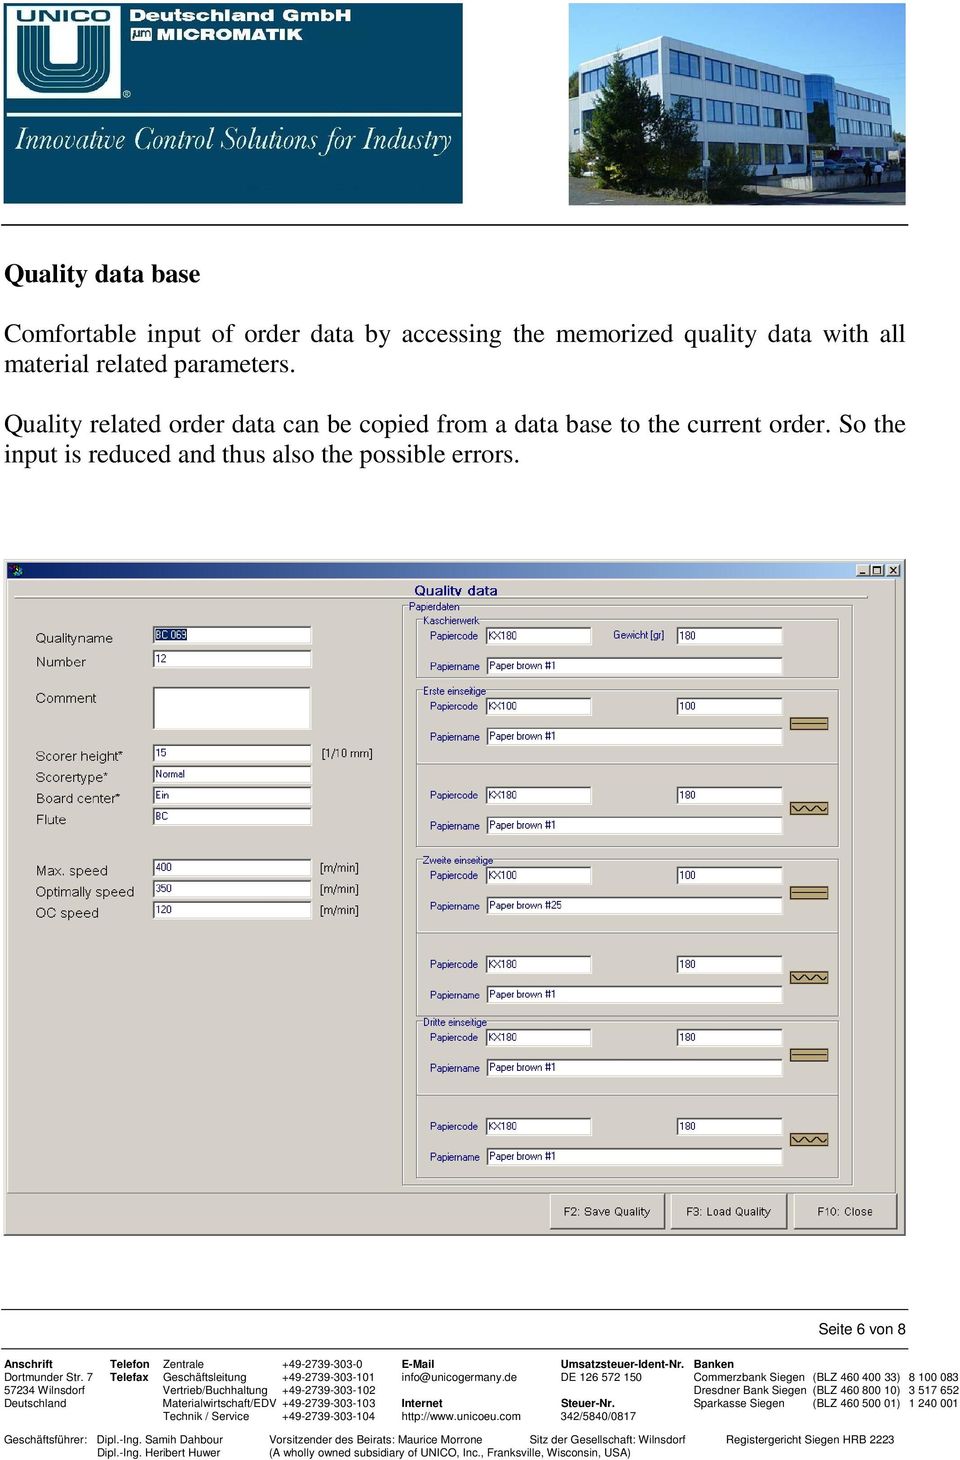 Quality related order data can be copied from a data base to the